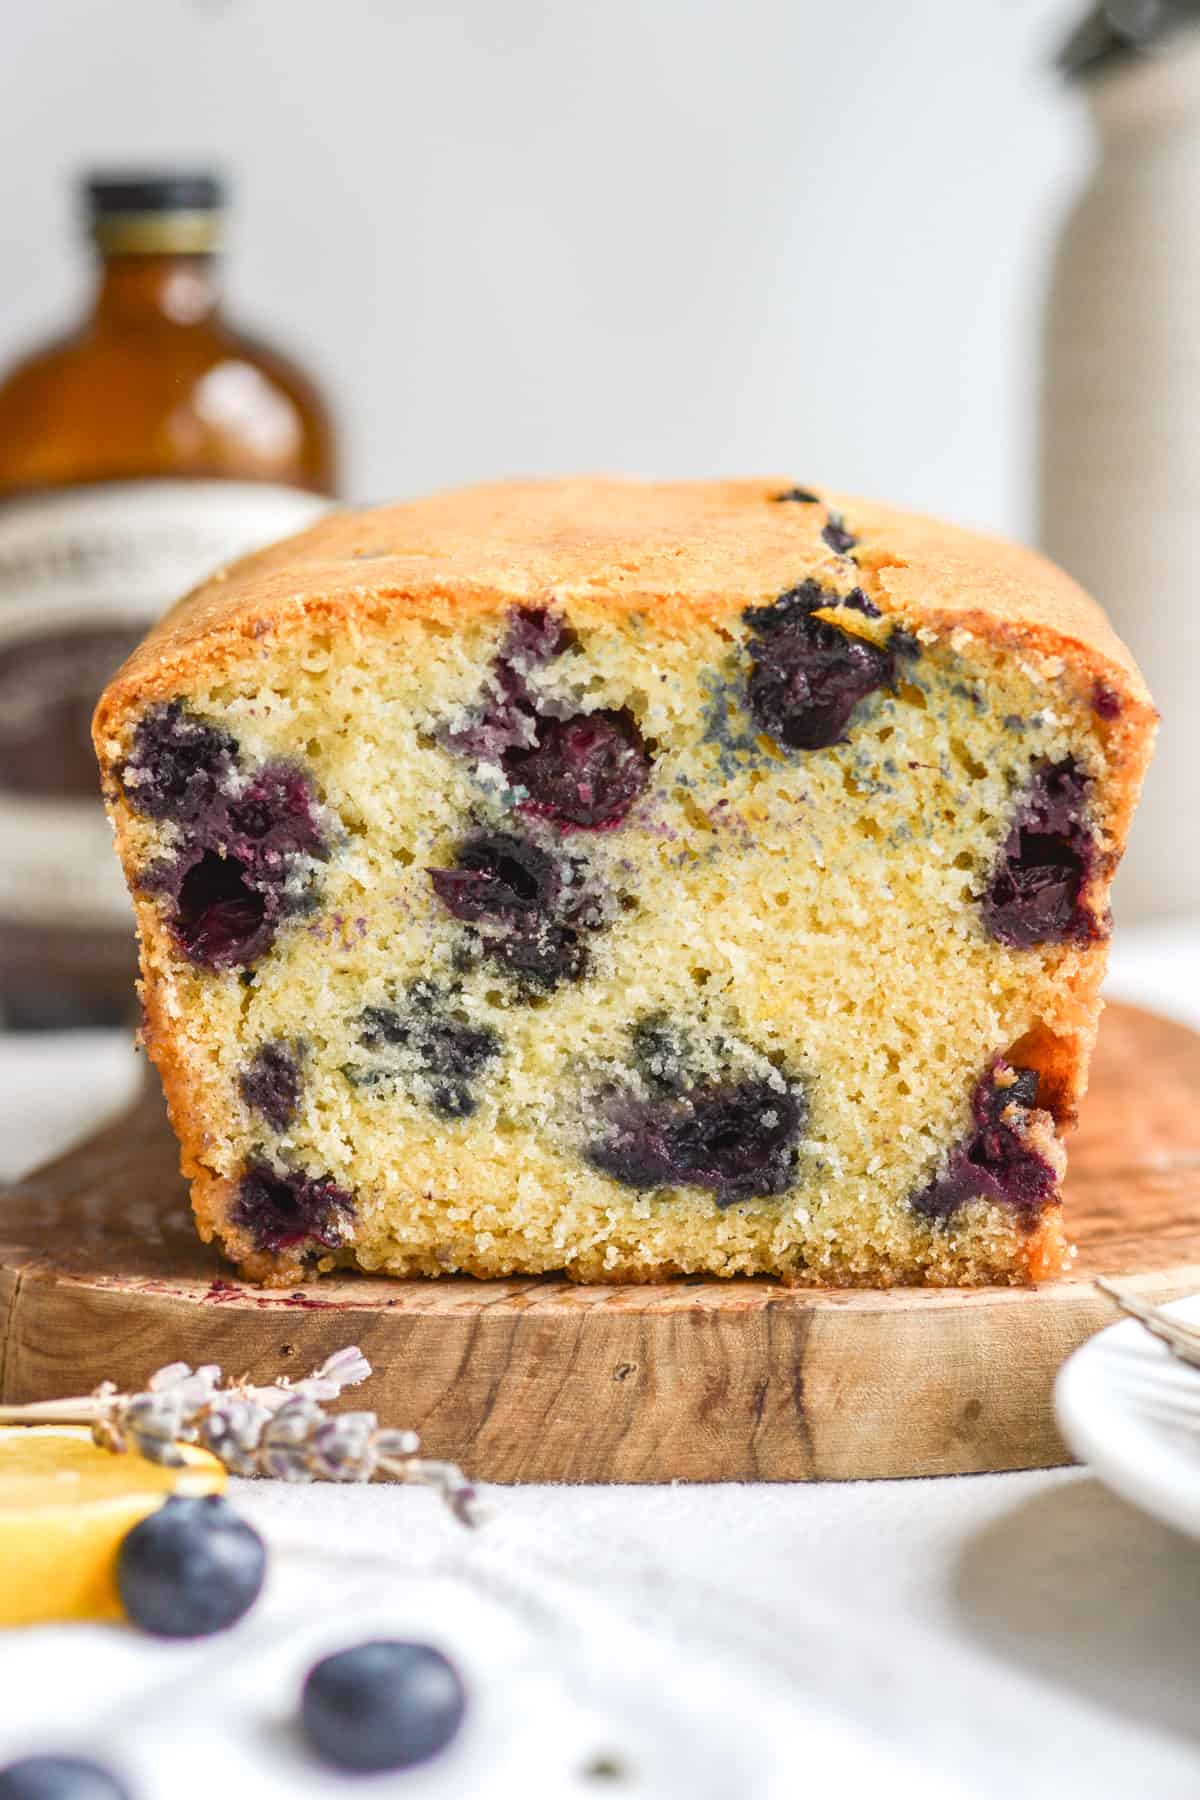 Cross section of the vegan blueberry lemon loaf cake on a small wooden board.